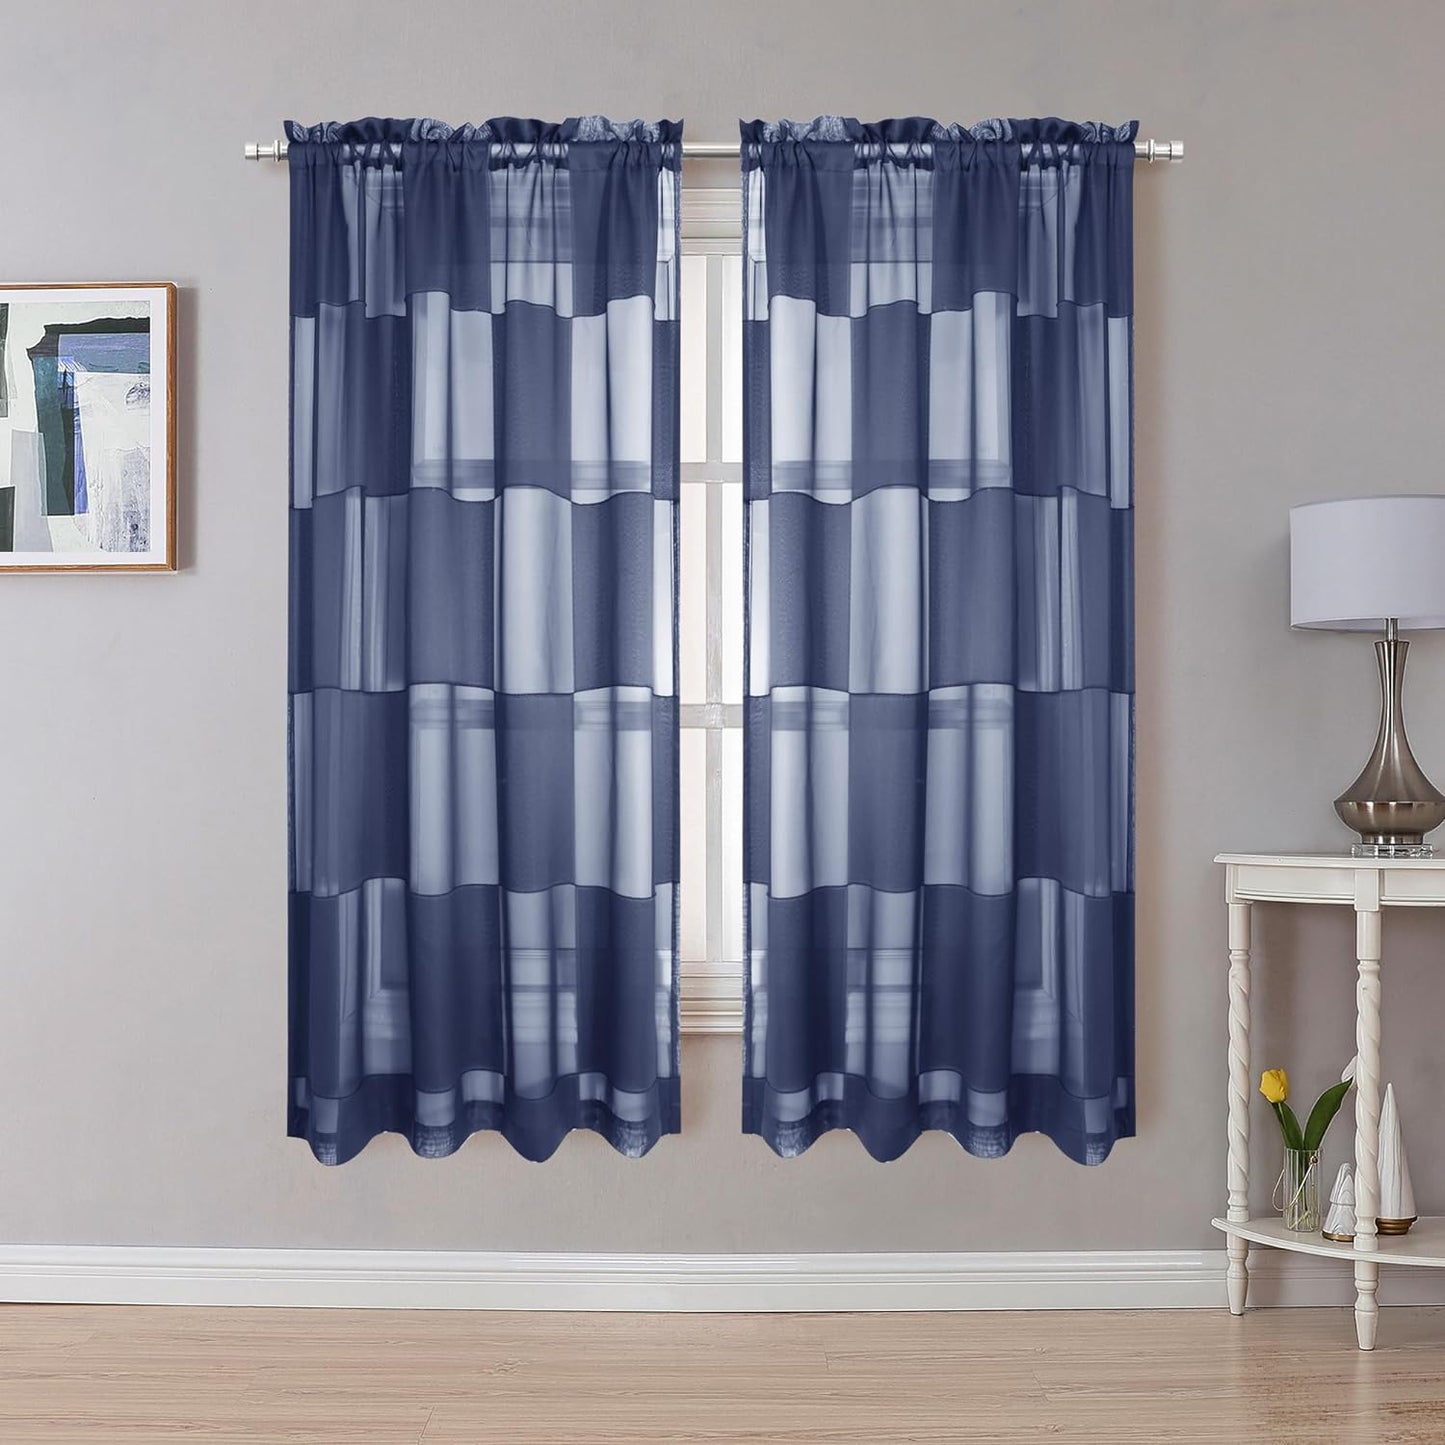 OVZME Sage Green Sheer Bedroom Curtains 84 Inch Length 2 Panels Set, Dual Rod Pocket Clip Checkered Window Curtains for Living Room, Light Filtering & Privacy Sheer Green Drapes, Each 42W X 84L  OVZME Navy Blue 42W X 63L 